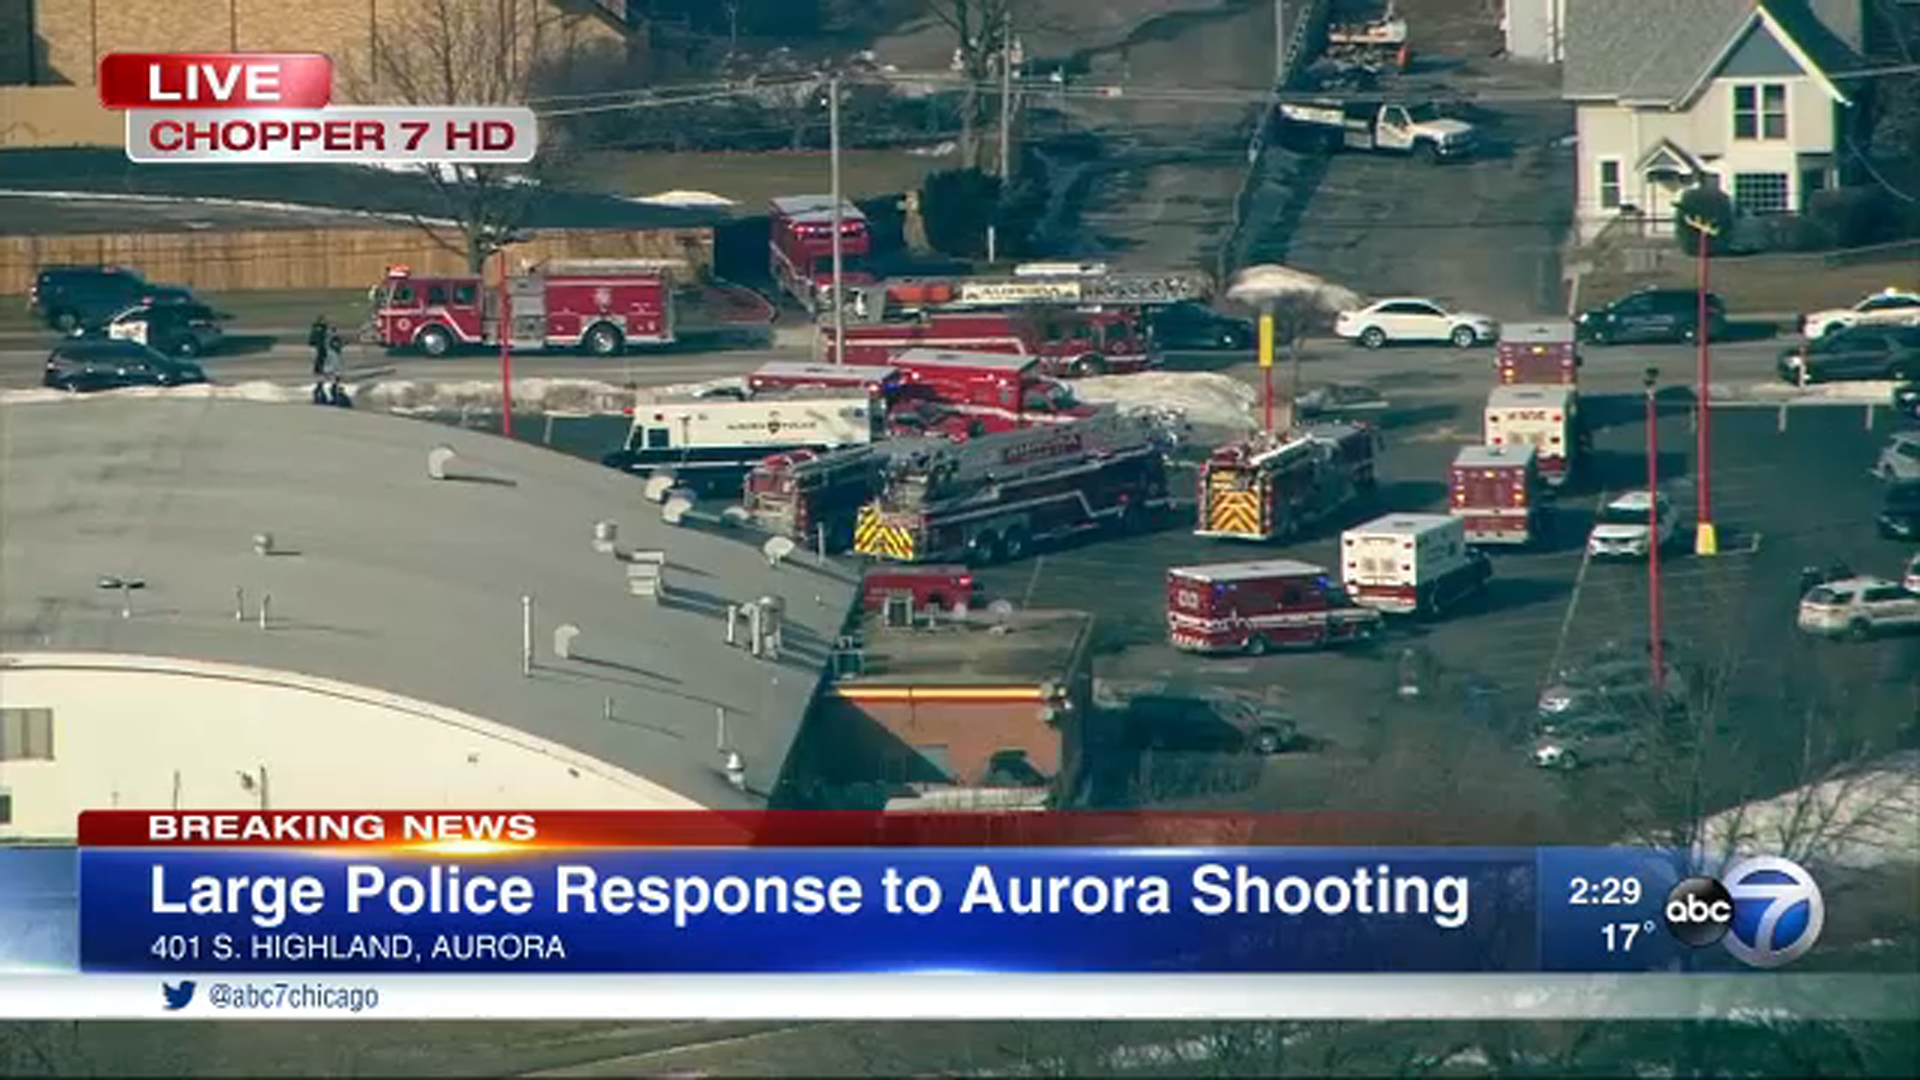 WATCH LIVE: Aurora shooting leaves multiple wounded, large police presence reported at ...